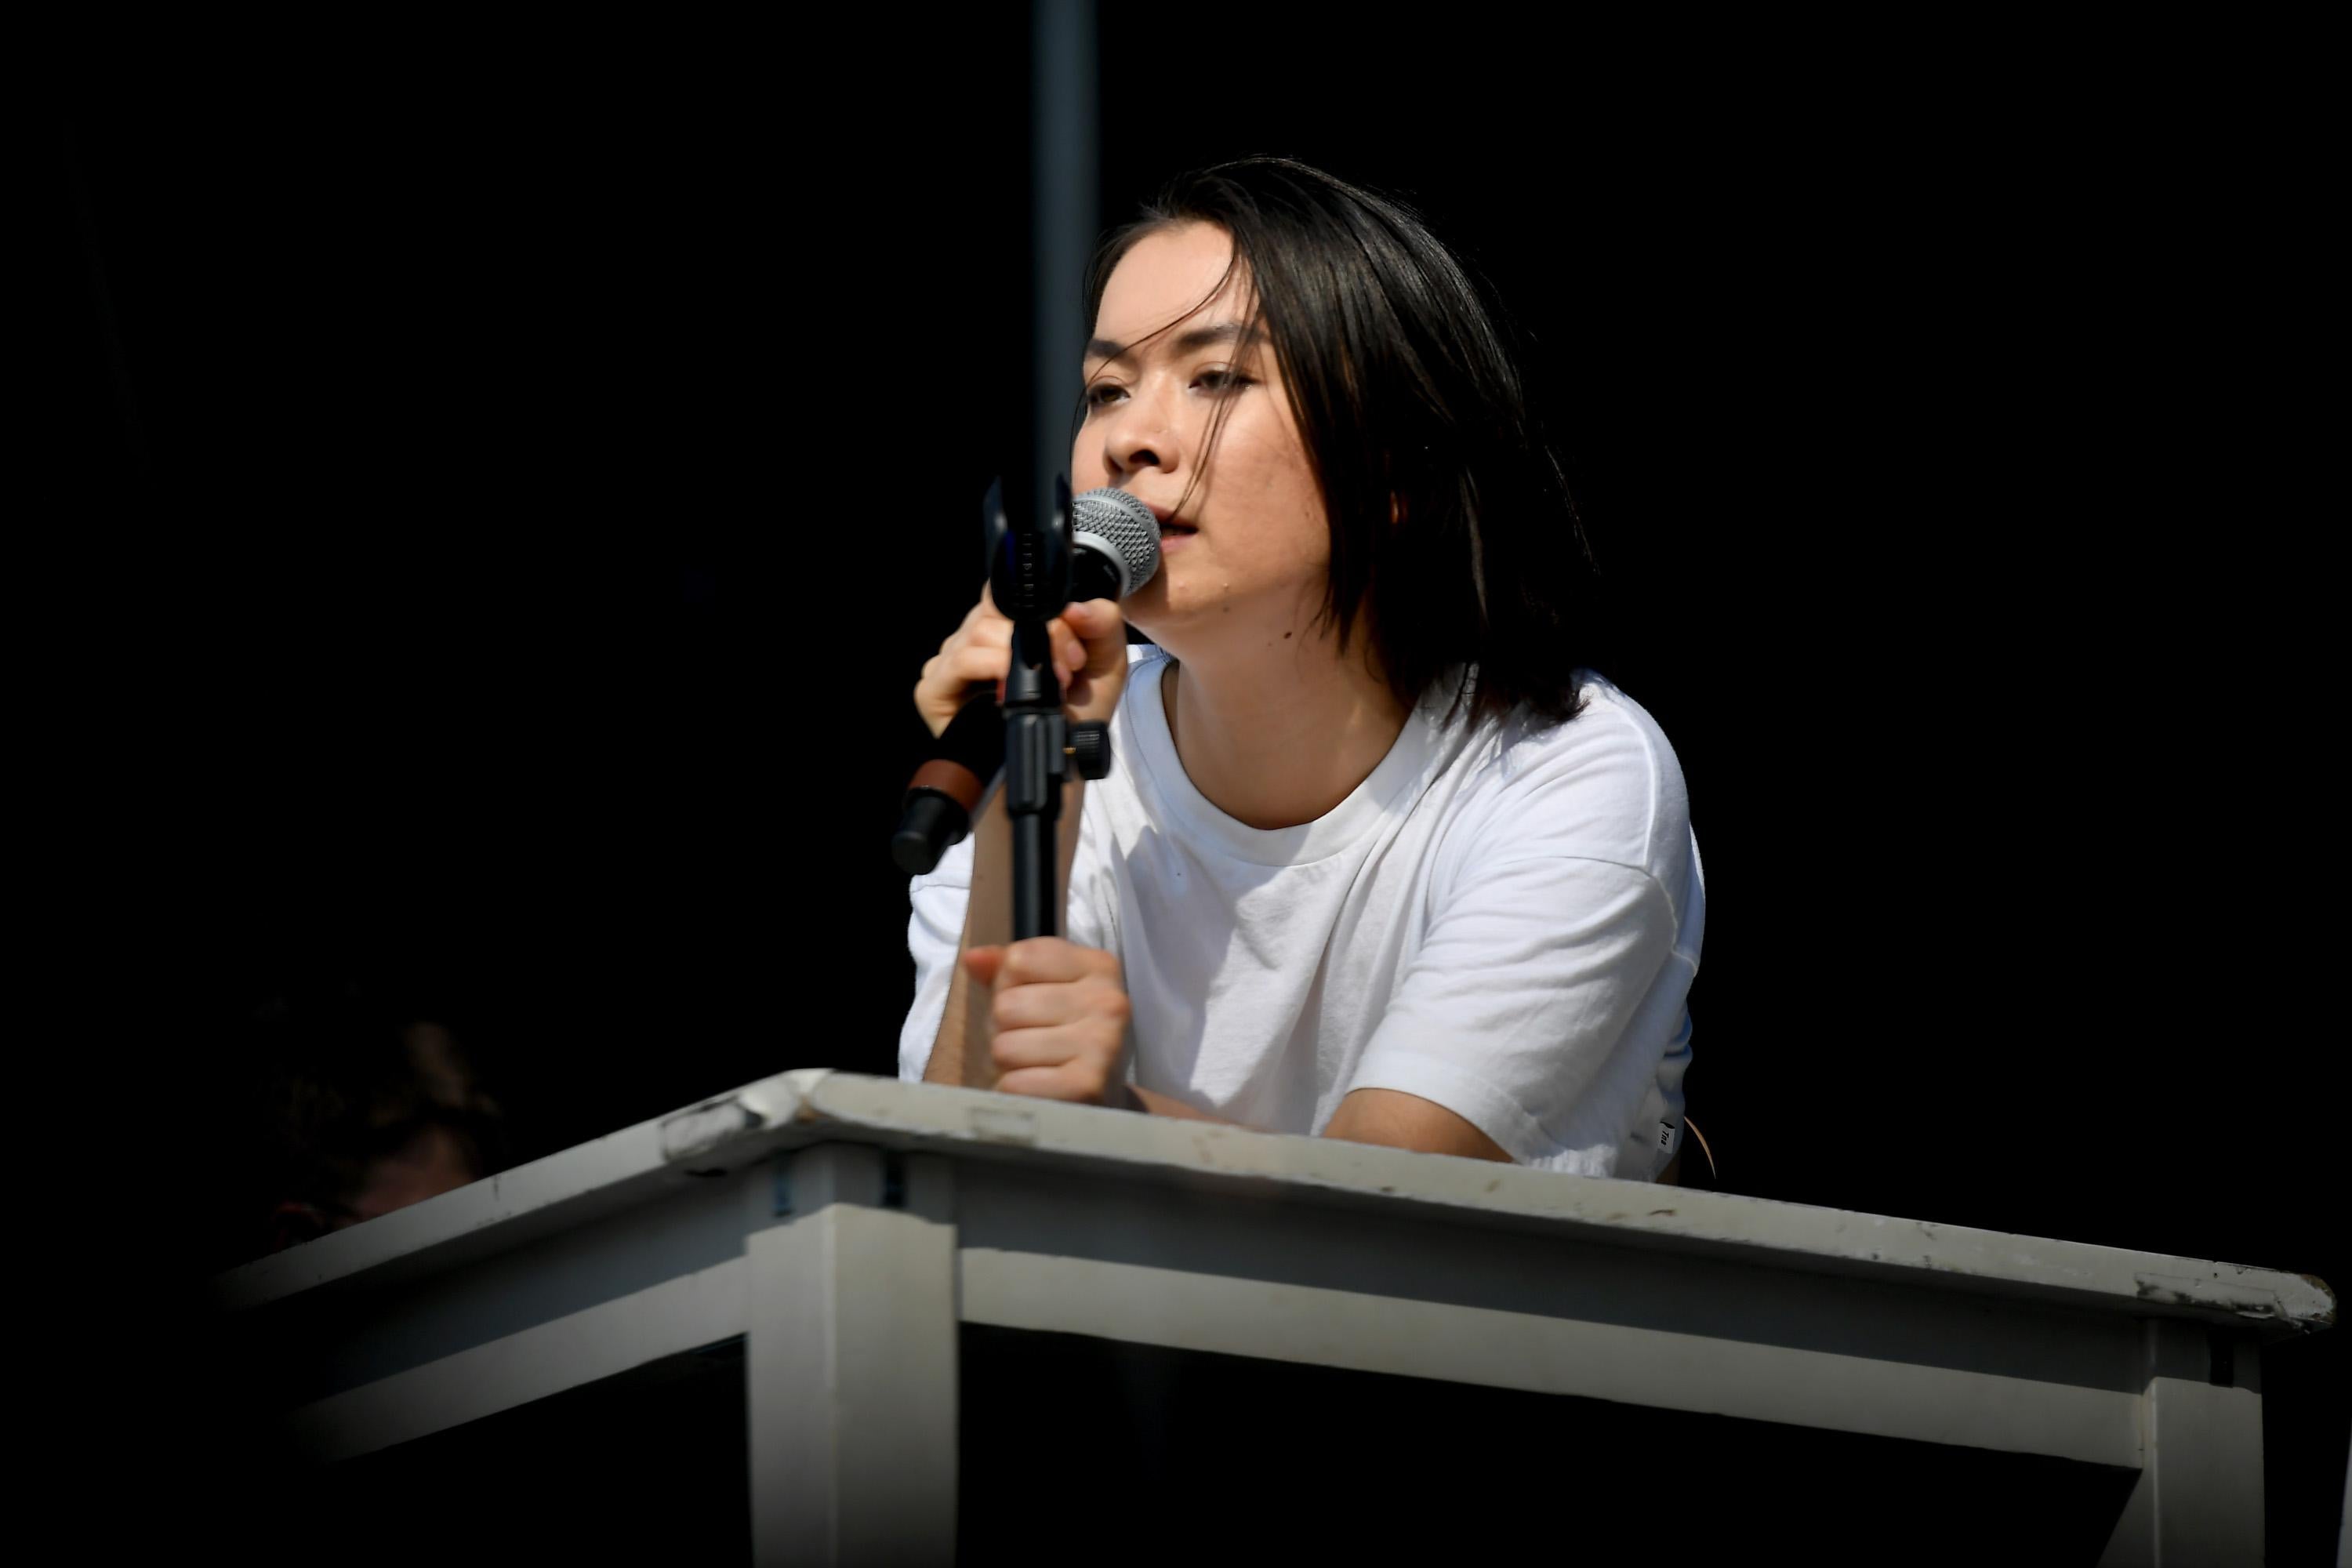 A woman with short black hair wearing a white T-shirt sings into a microphone in her hand. She is leaning on a gray table onstage.